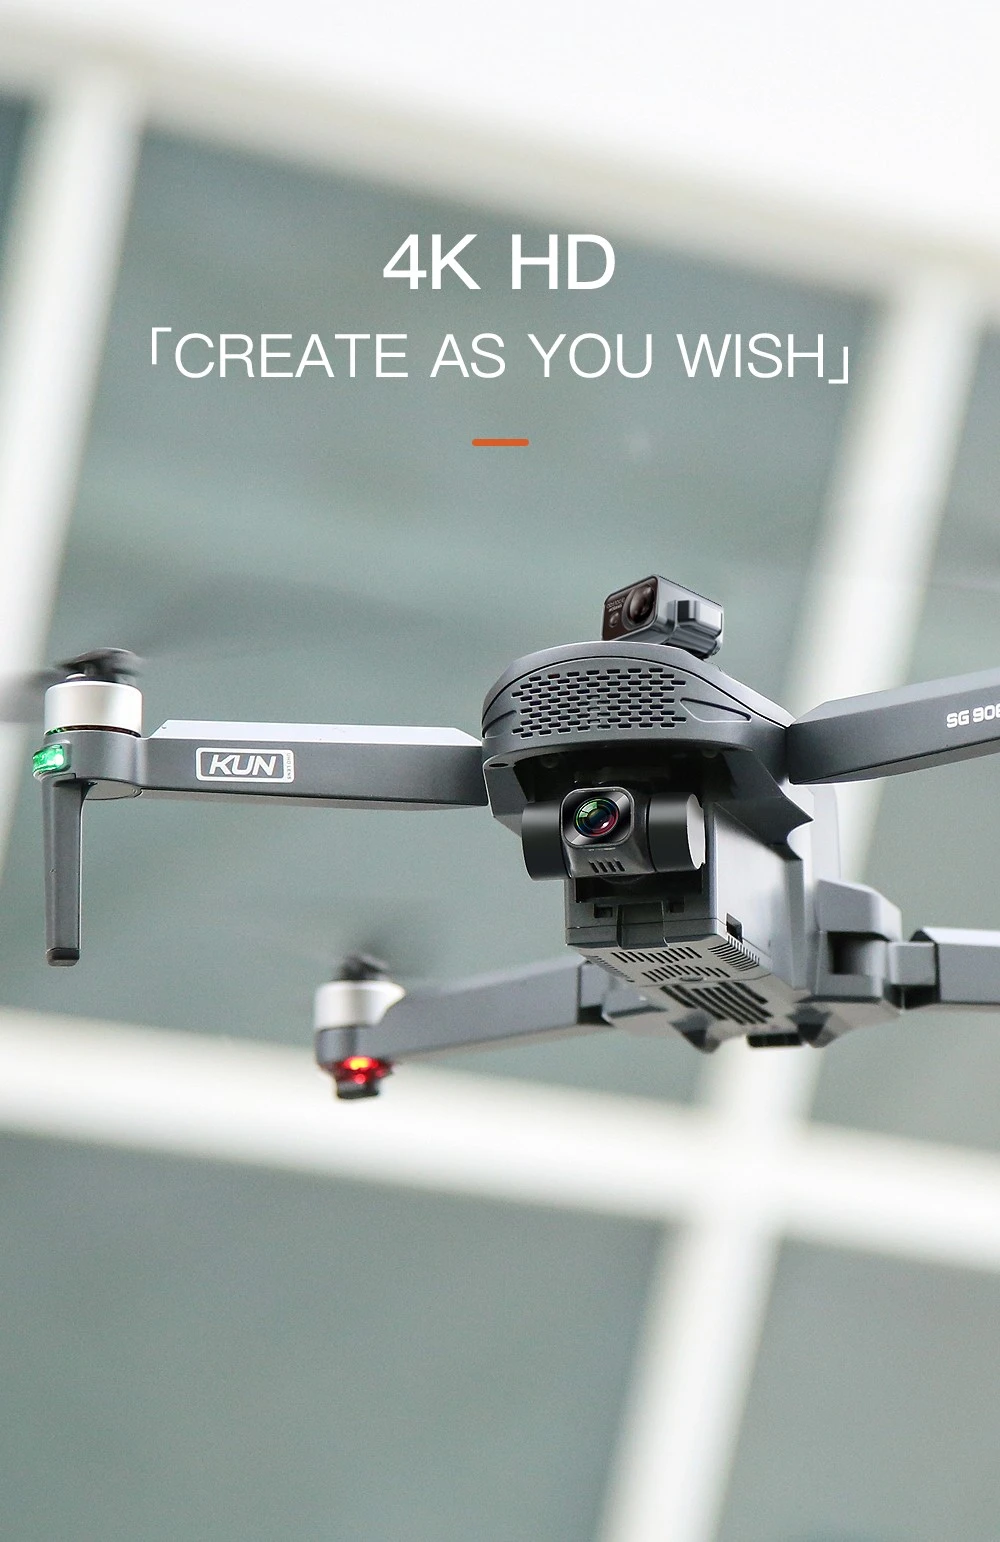 ZLL SG908 Pro 4K 5G WIFI FPV GPS 3-Axis Gimbal 360 Degree Obstacle Avoidance Brushless RC Drone RTF - Three Batteries